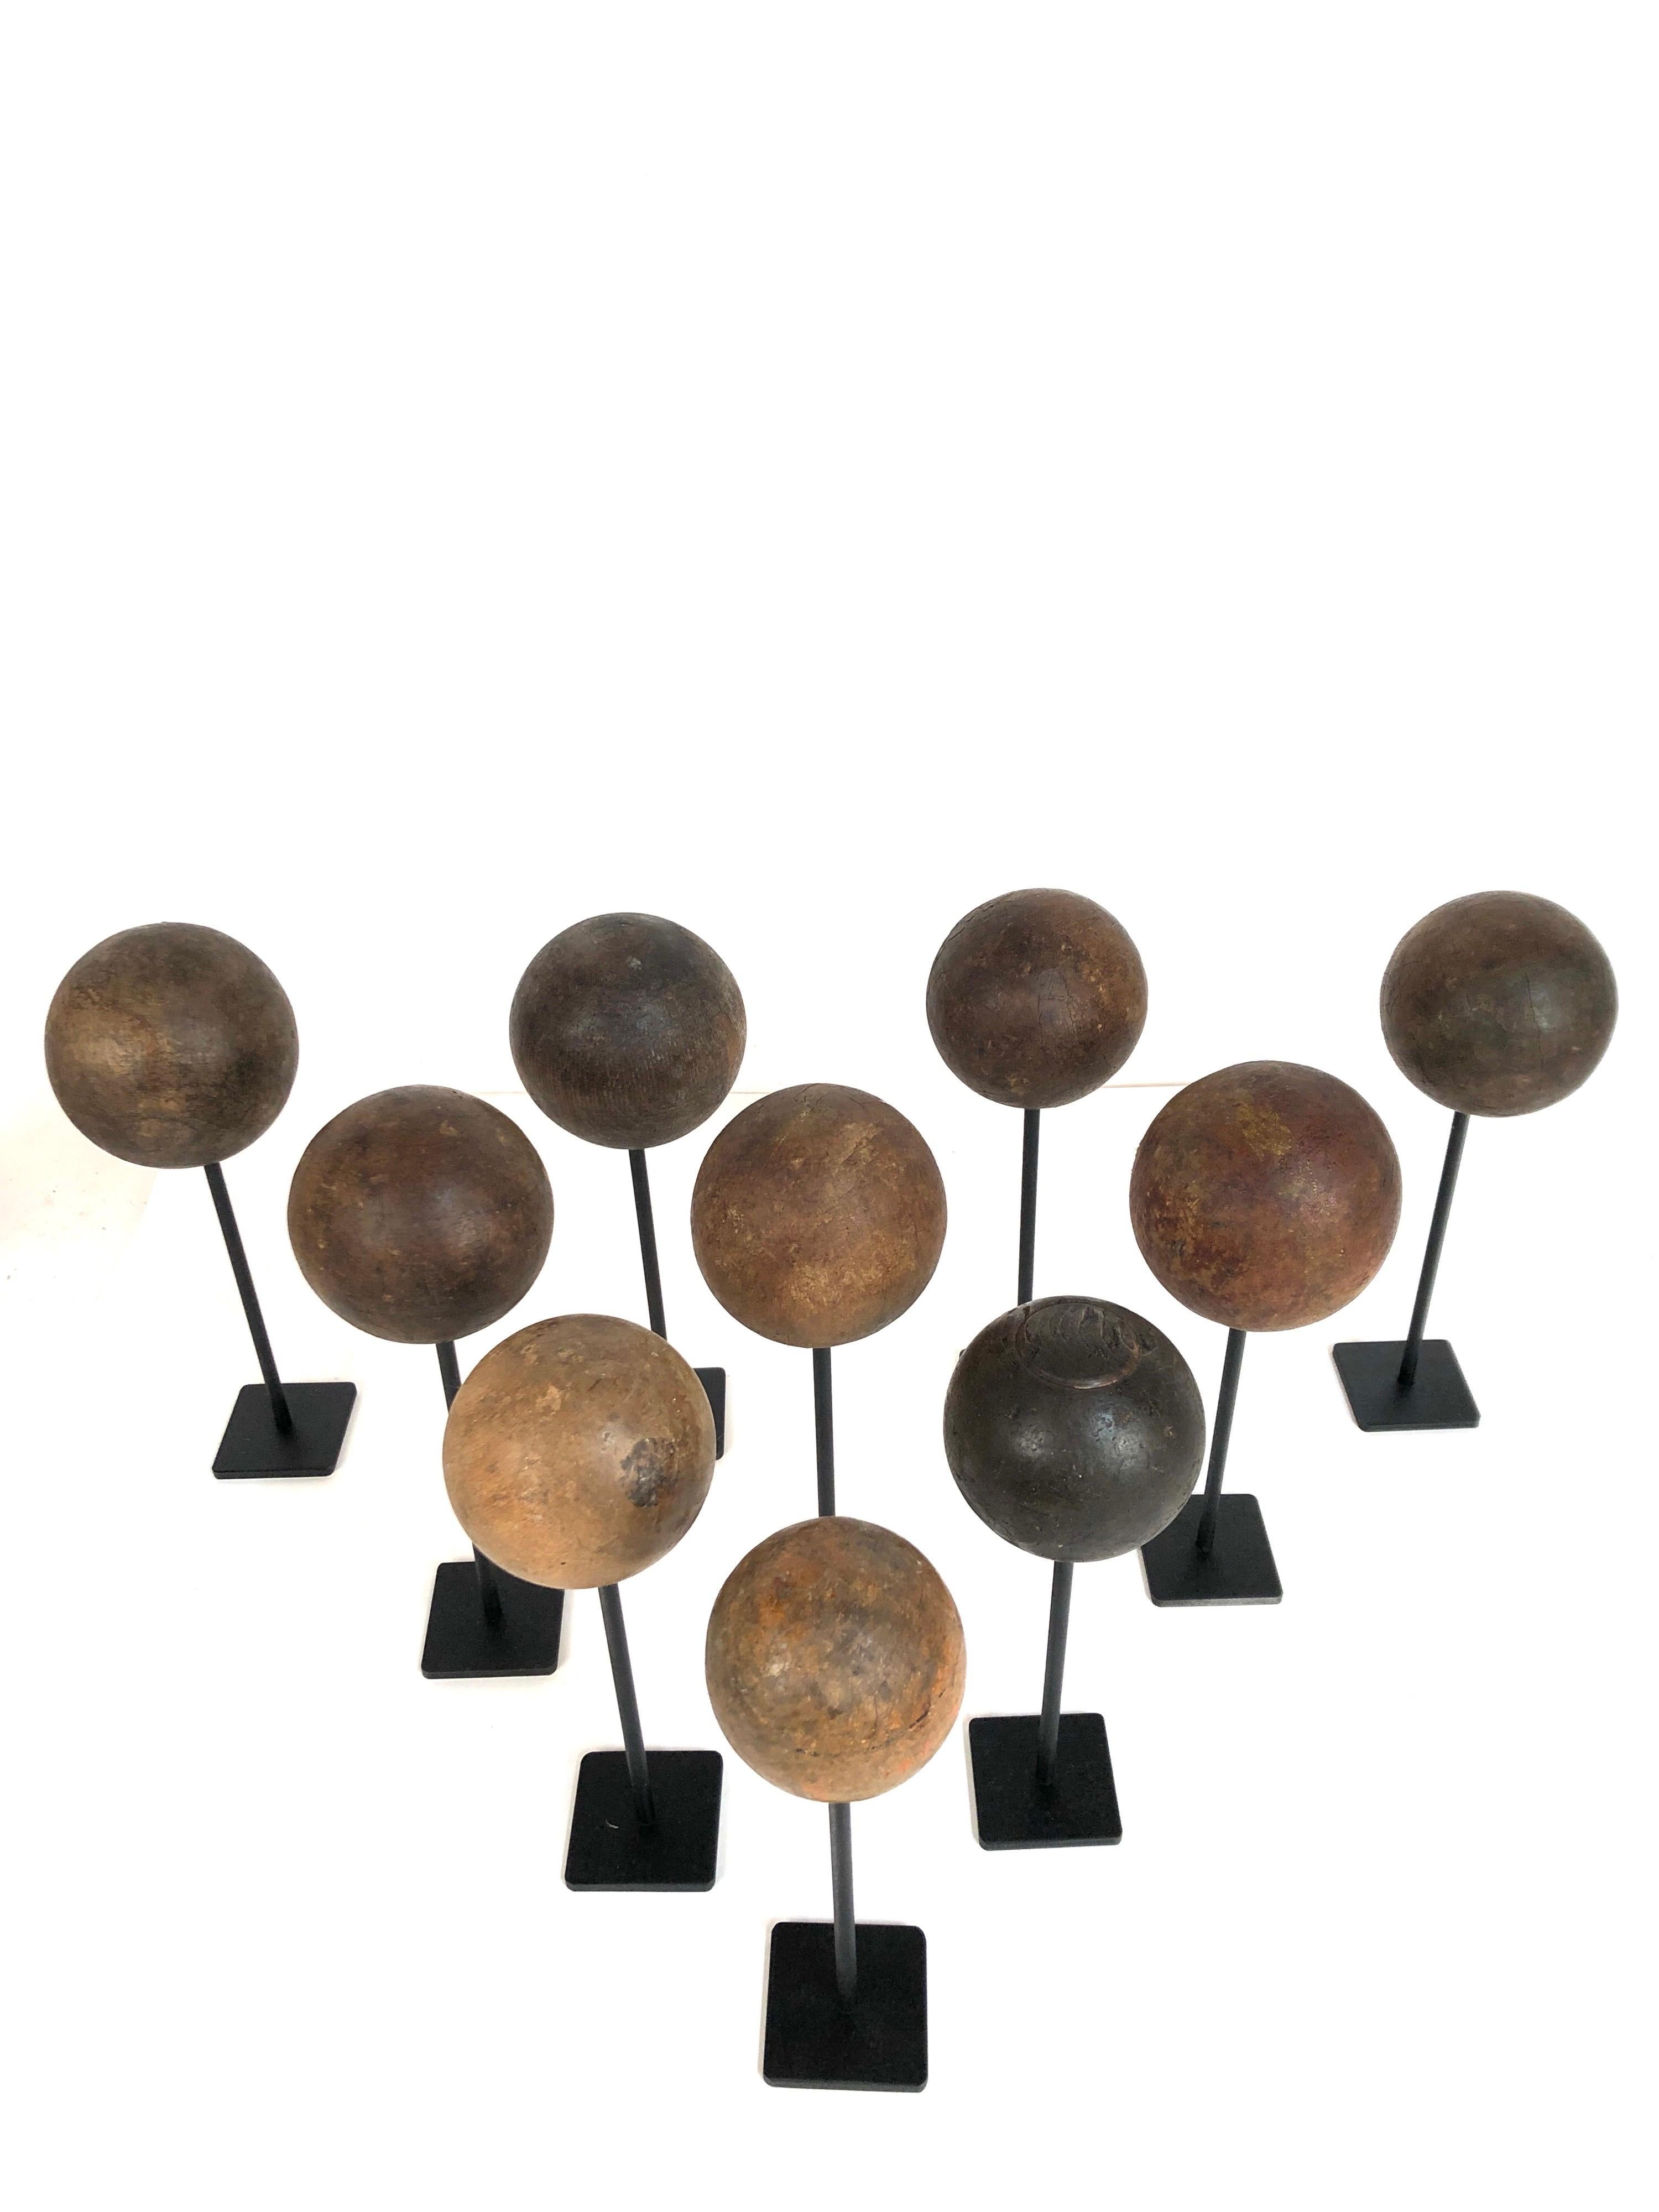 A collection of 10 antique wooden balls. All from various games including bocce and croquet. Varying colors and woods. All waxed and custom mounted on black painted steel stands. They range in size from 9